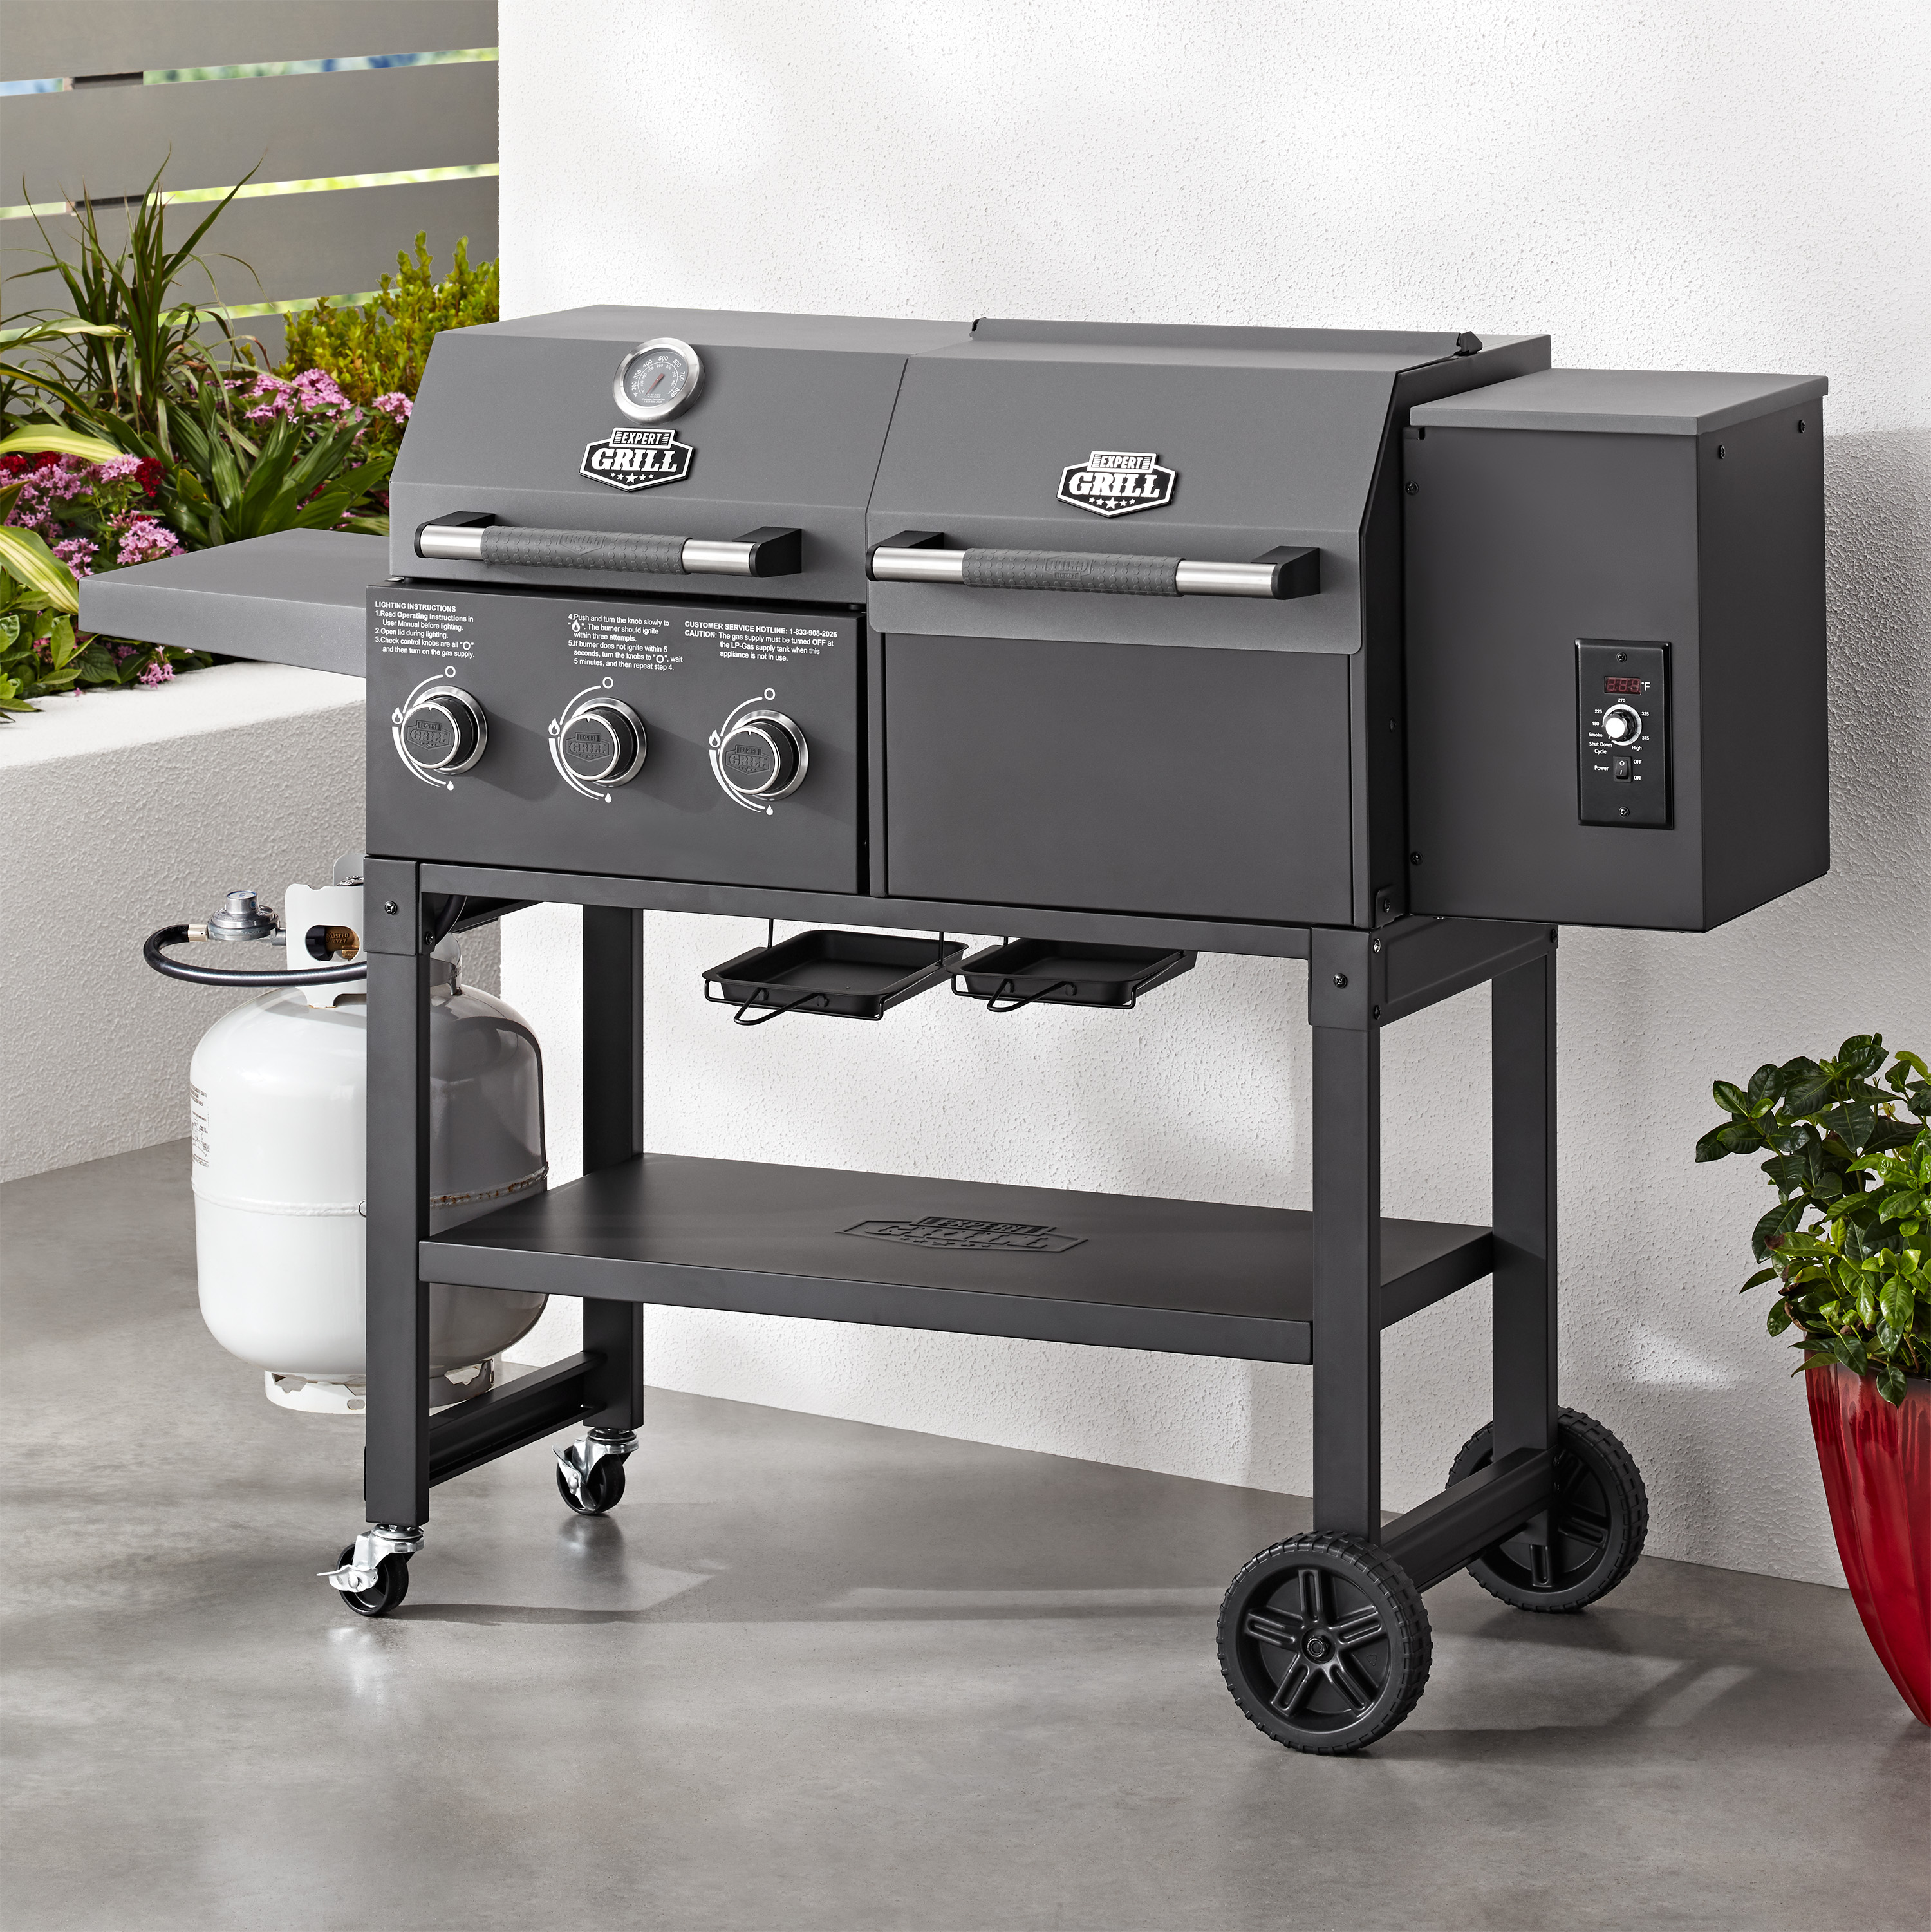 Expert Grill Gas Grill and Pellet Grill Combo - image 2 of 9